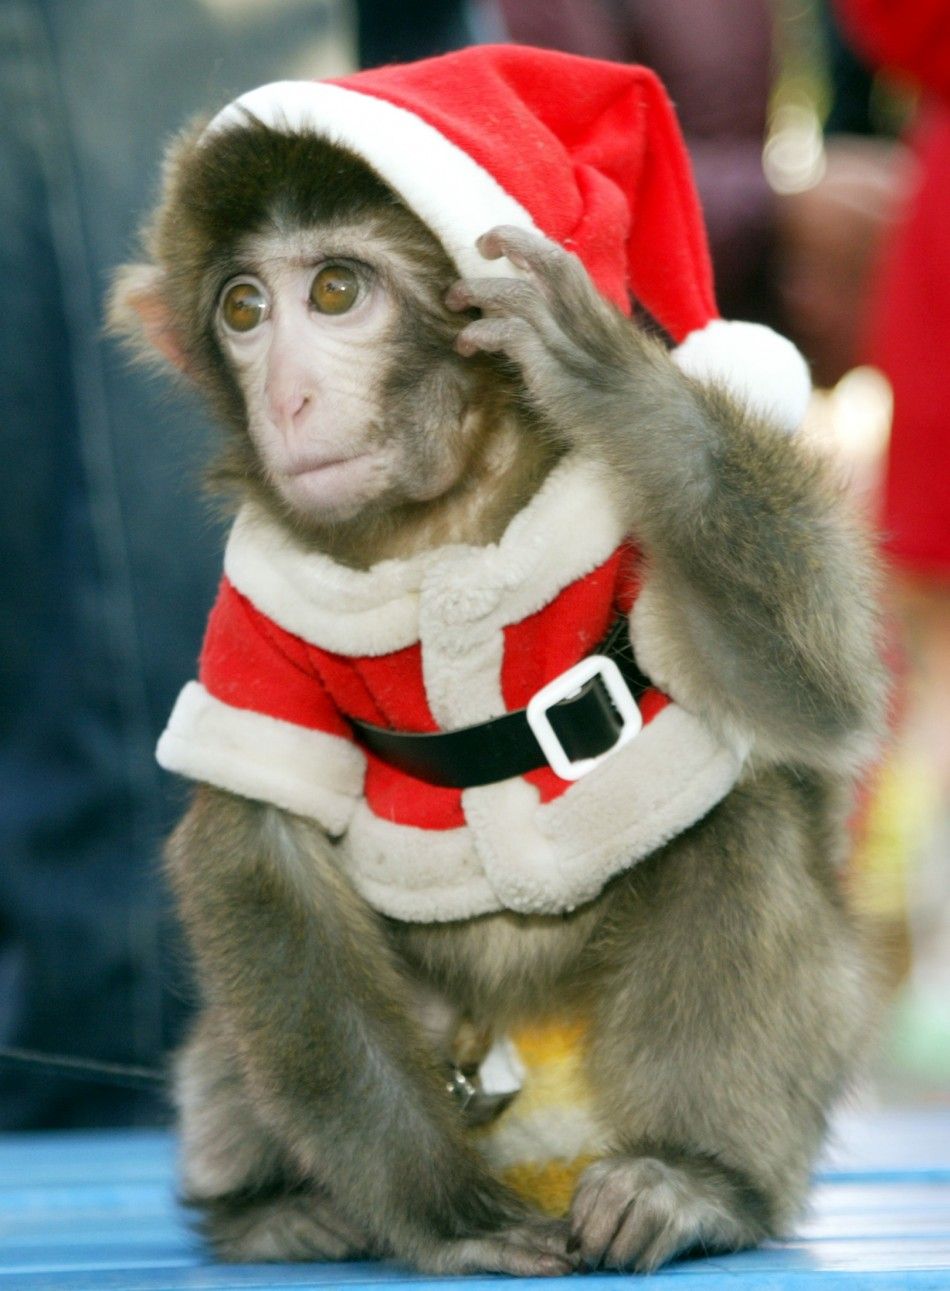 Monkey dressed in Santa Claus outfit